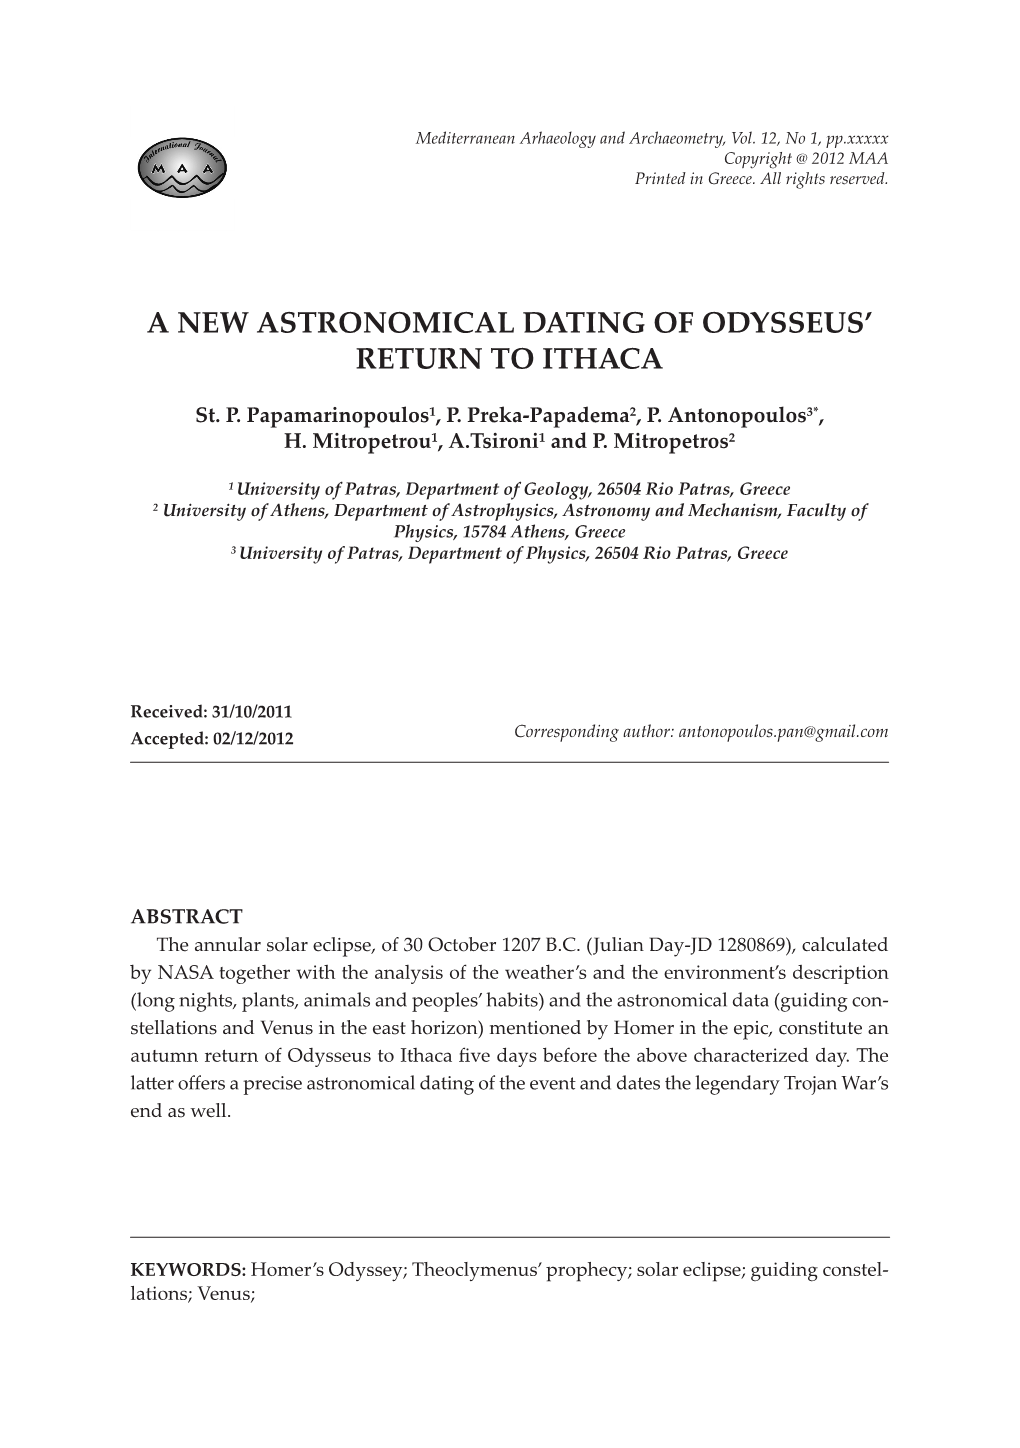 A New Astronomical Dating of Odysseus' Return to Ithaca